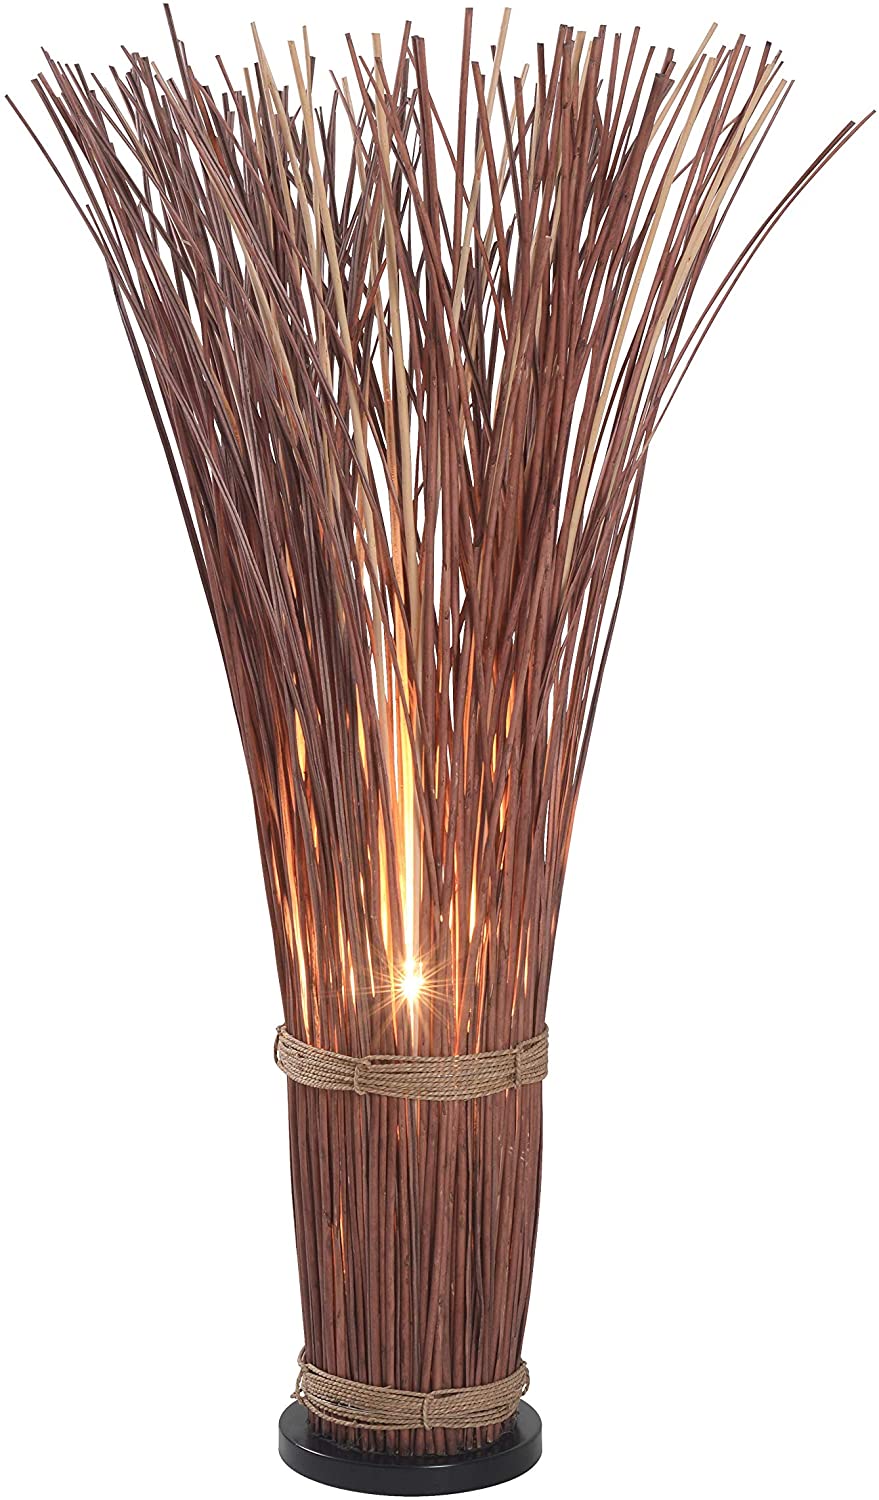 Kenroy Home Casual Floor Lamp46 Inch Height with Natural Reed Finish 15 Unique Artistic Floor Lamps to Light Your Bedroom - 13